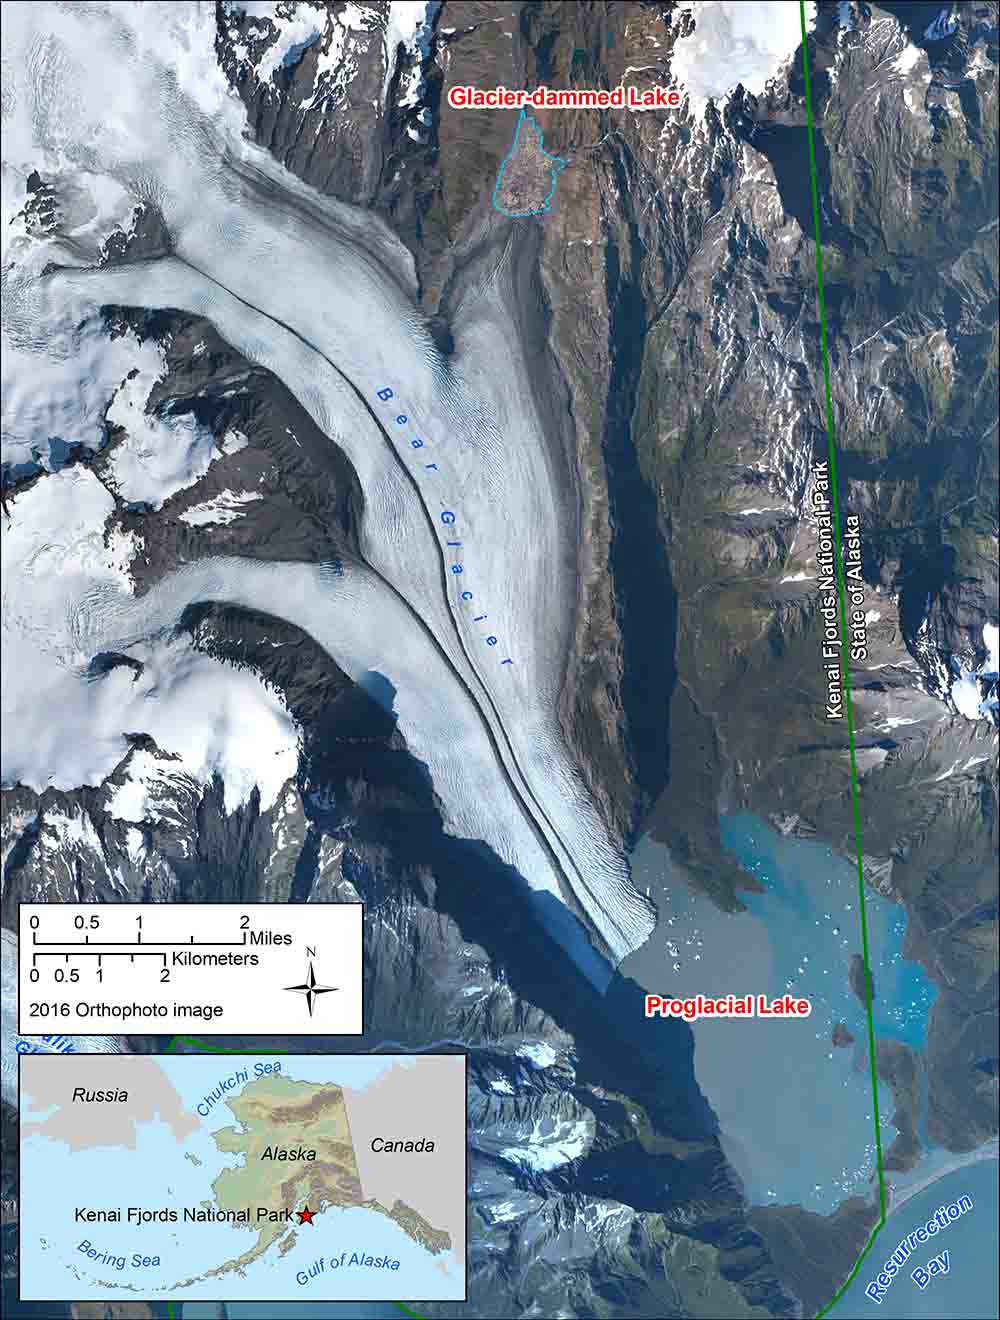 Risk and Recreation in a Glacial Environment: Understanding Glacial ...